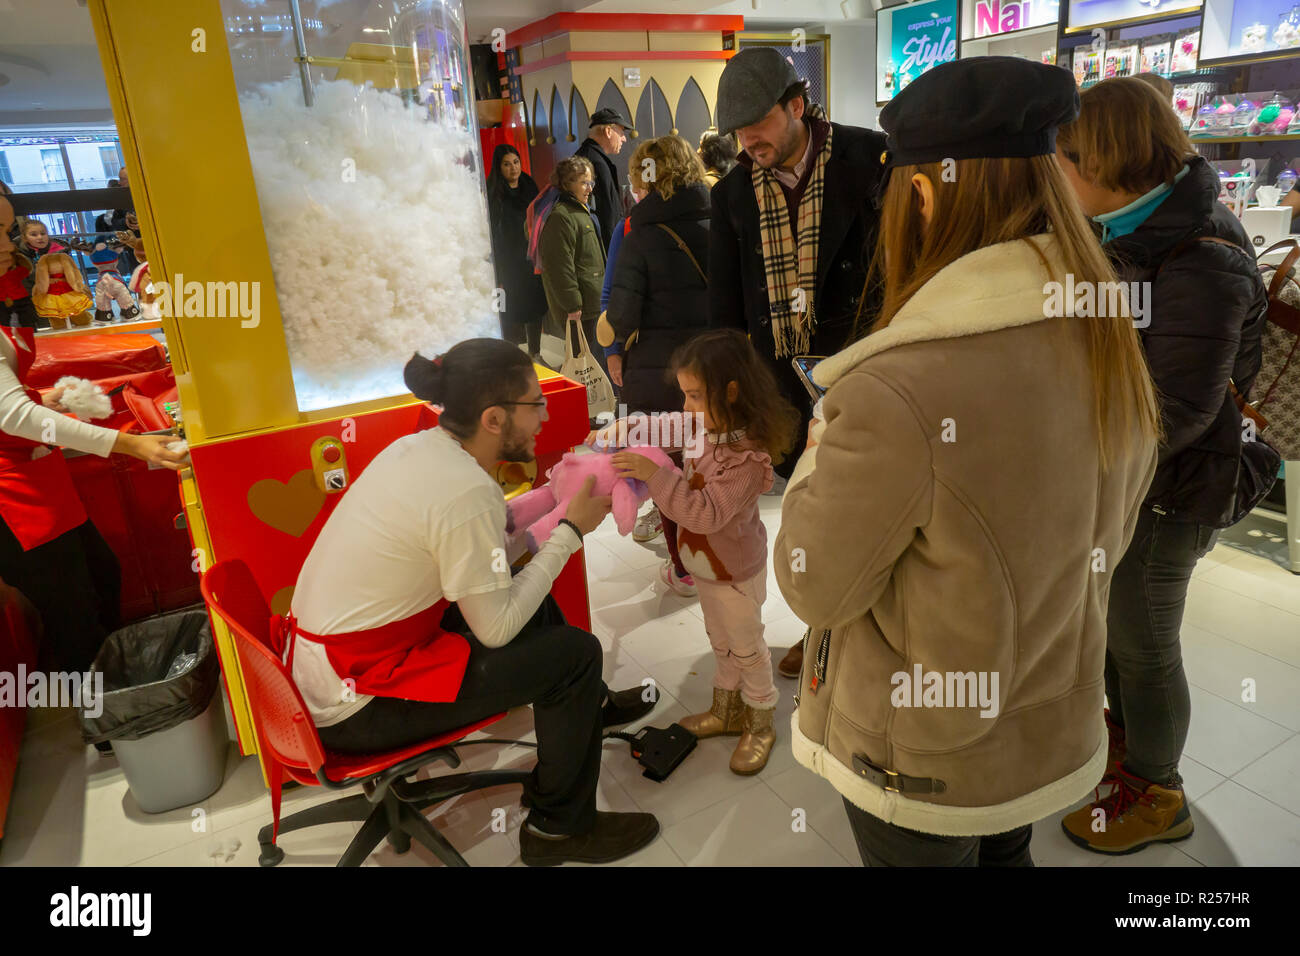 New York, USA. 16th November 2018. The Build-a-Bear workshop in the toy emporium FAO Schwarz, seen on its grand opening, Friday, November 16, 2018. Three years after closing its doors on Fifth Avenue the retailer has been resurrected by the ThreeSixty Group which purchased the brand from Toys R Us in 2016. The new store captures the essence and nostalgia of the former location including the giant keyboard that was seen in the movie 'Big'. (Â© Richard B. Levine) Credit: Richard Levine/Alamy Live News Stock Photo